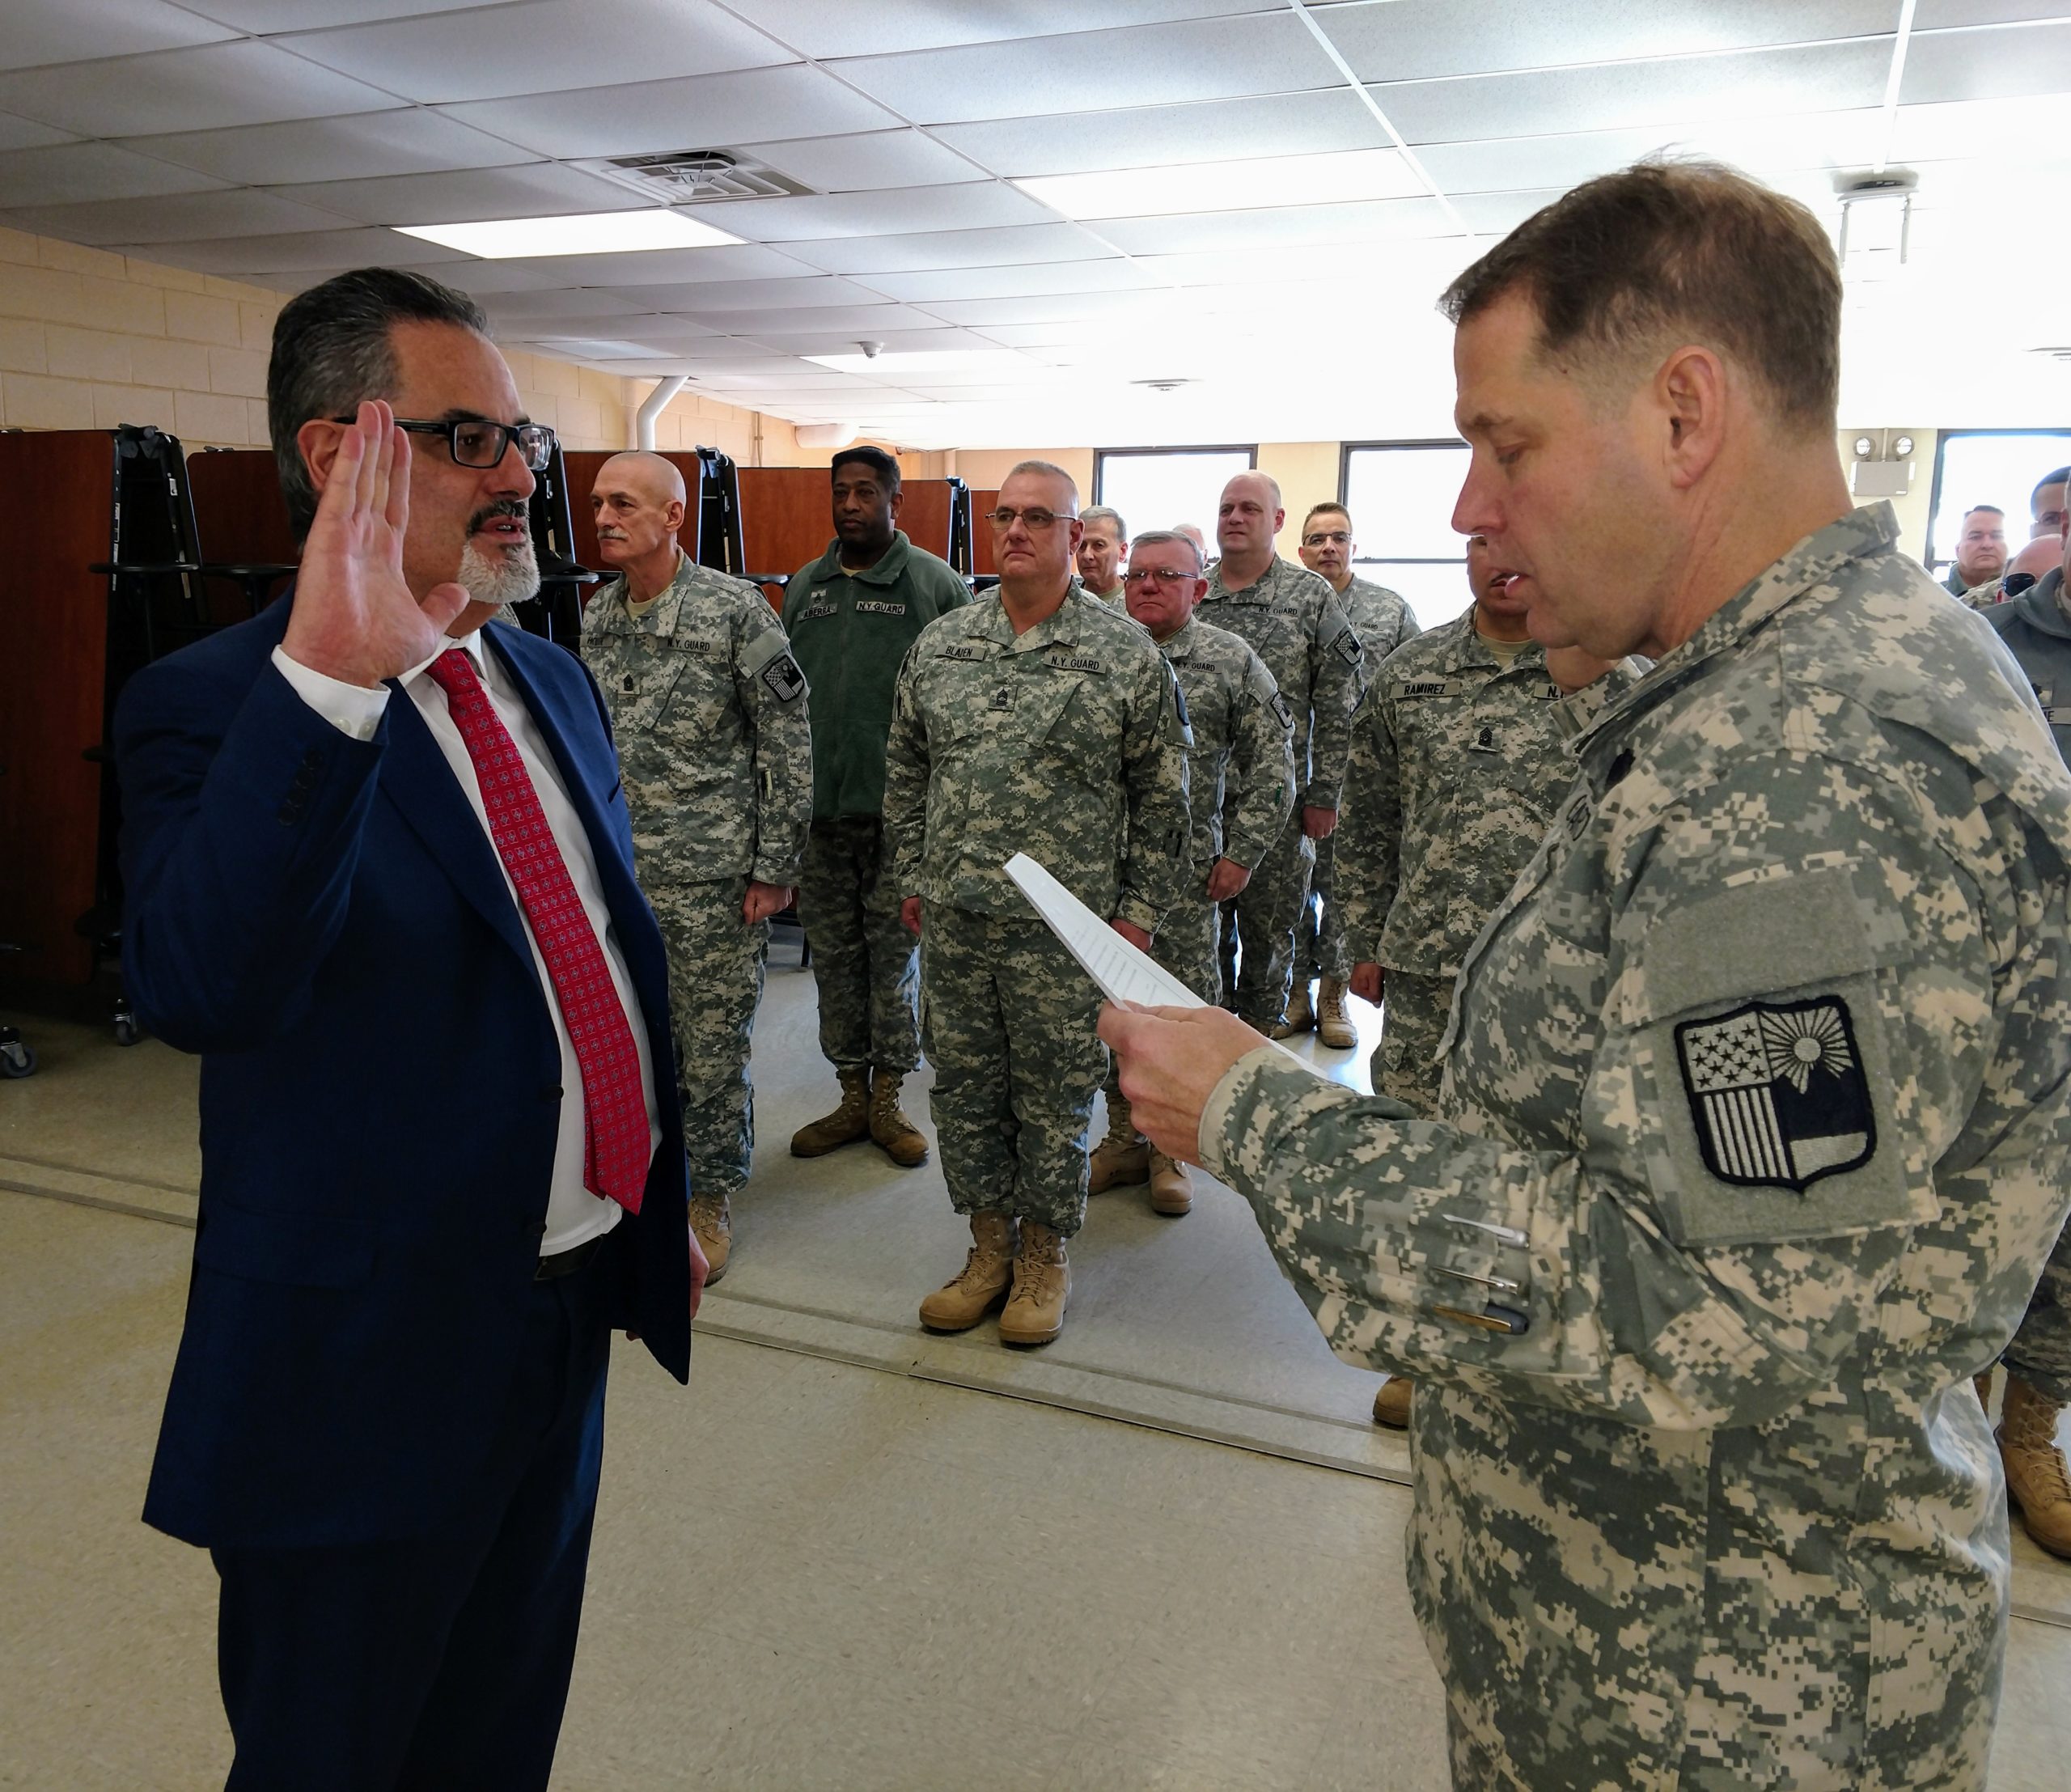 New York Guard Acting Commander Colonel David Warager swears in Robert Duarte of Northwell Health. (Photo by Capt. Mark Getman/New York Guard)